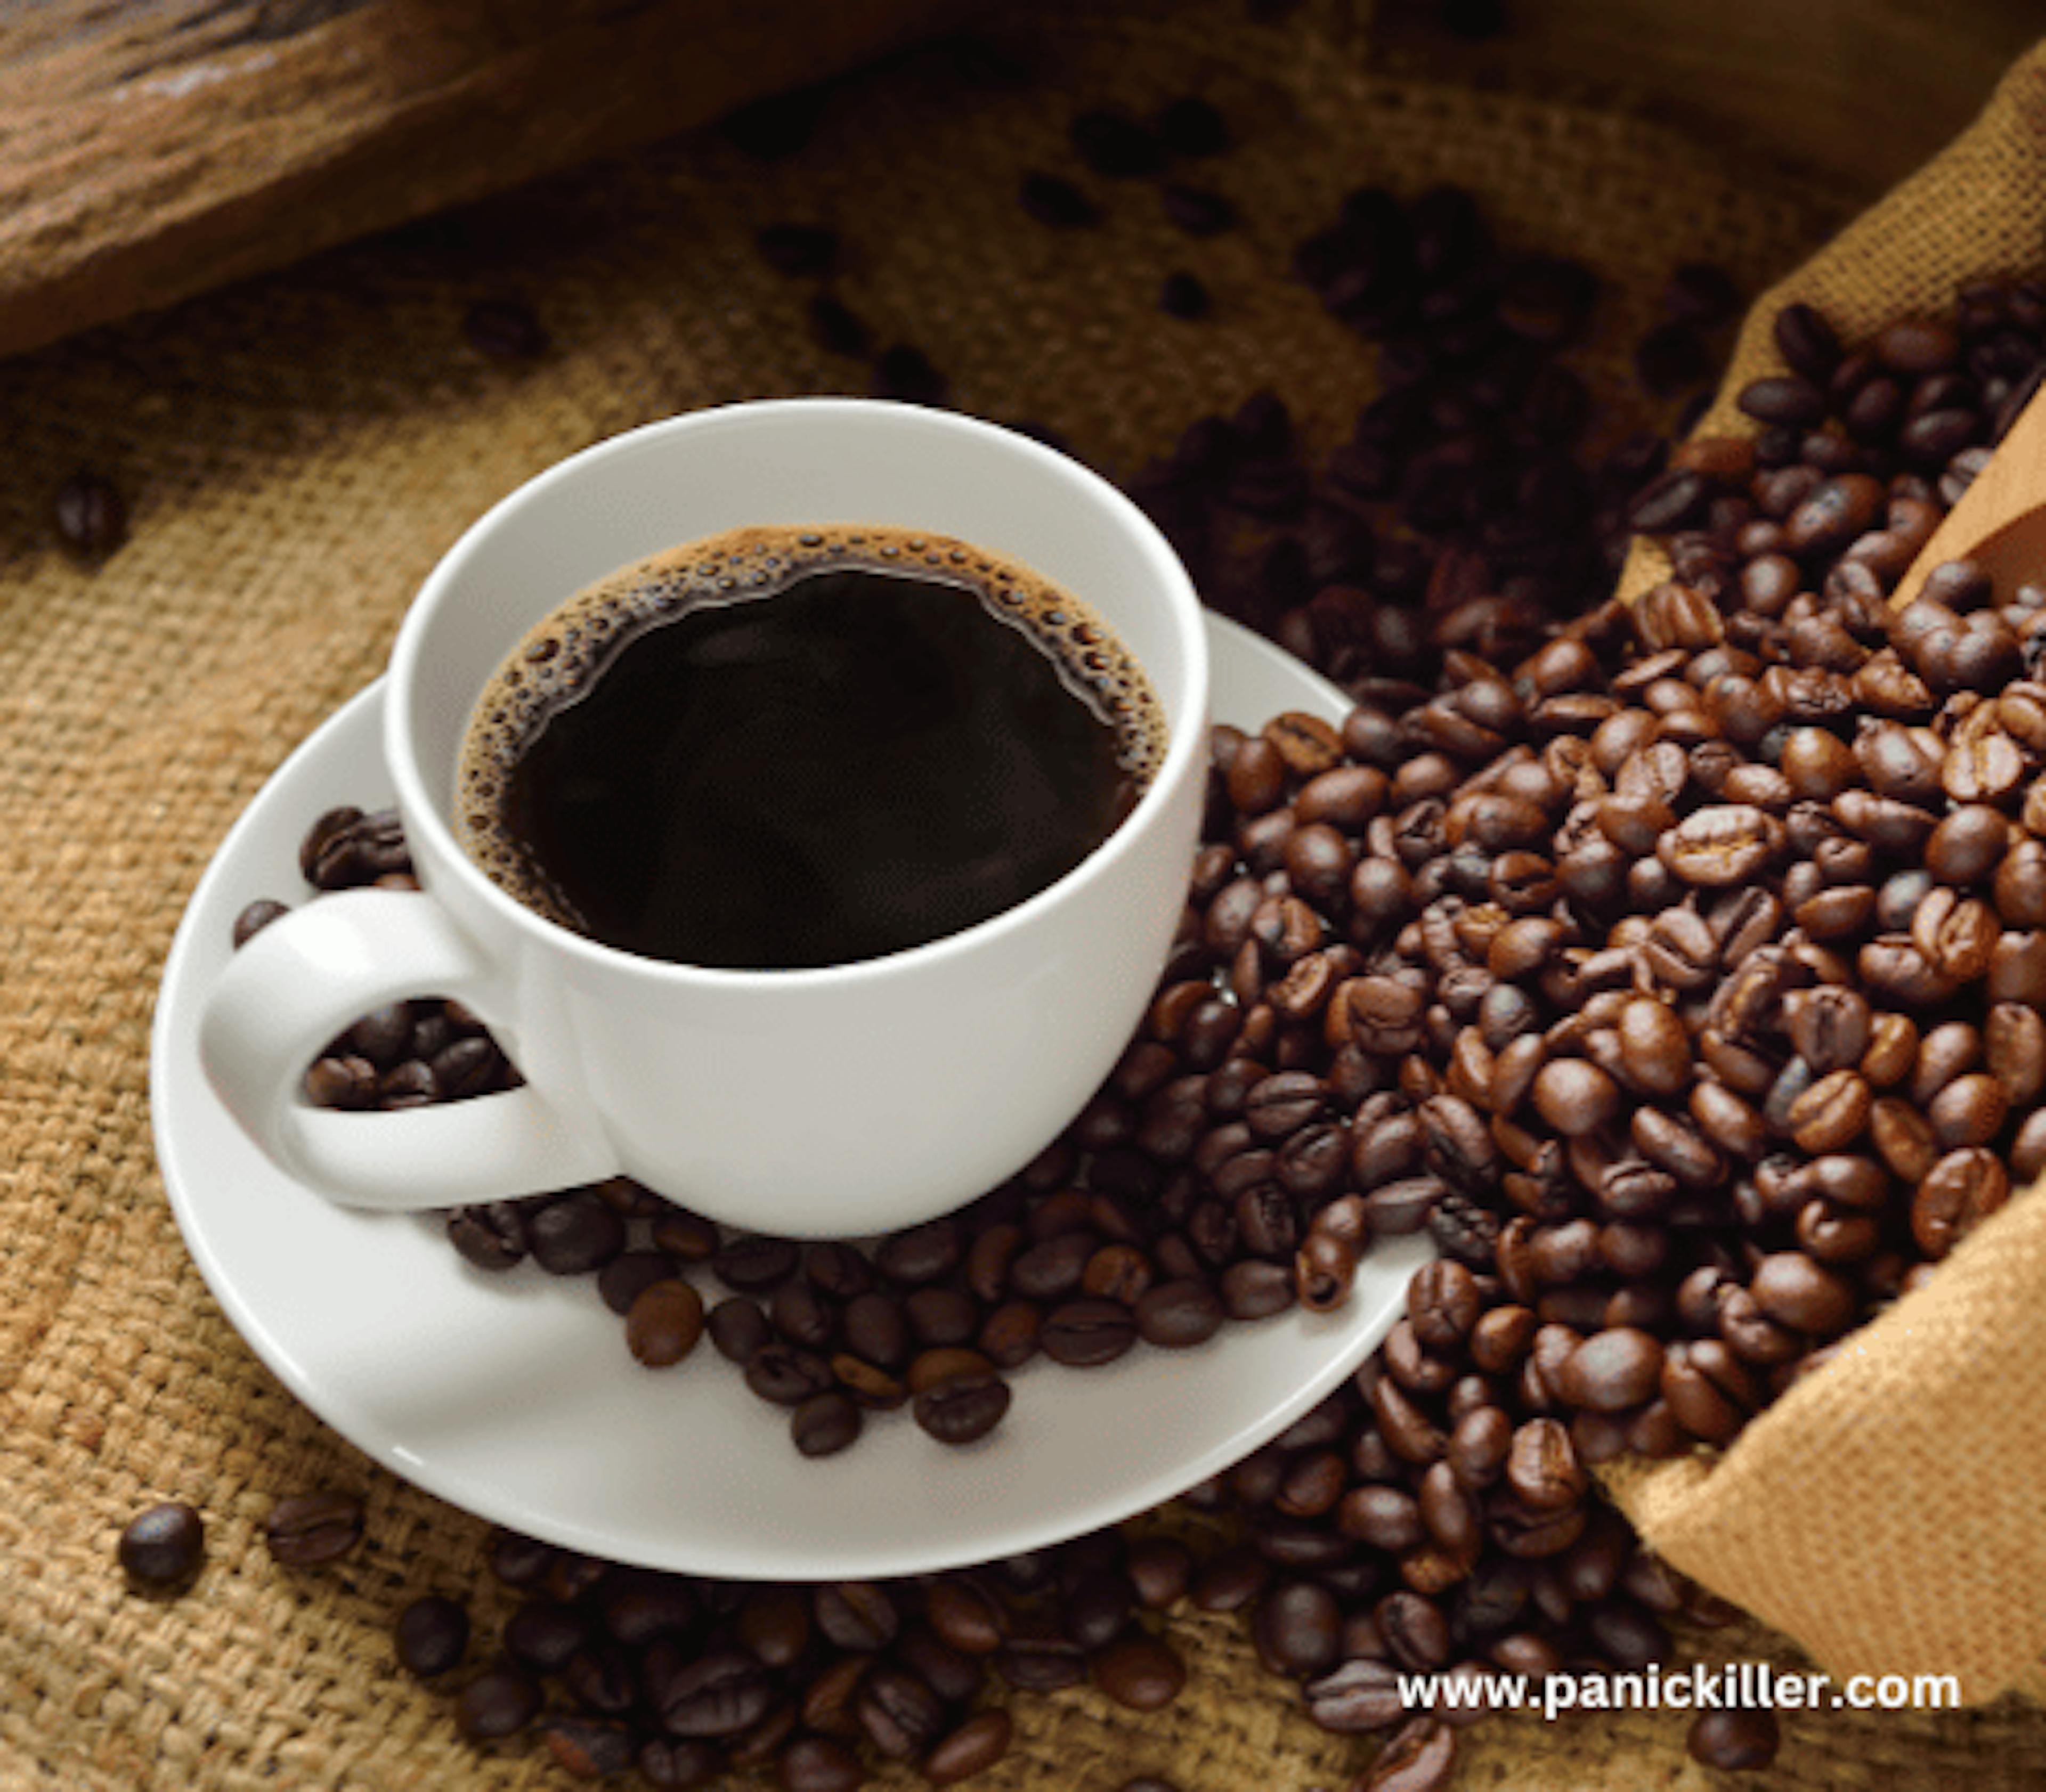 Taking coffee few hours before bed will affect your sleep quality